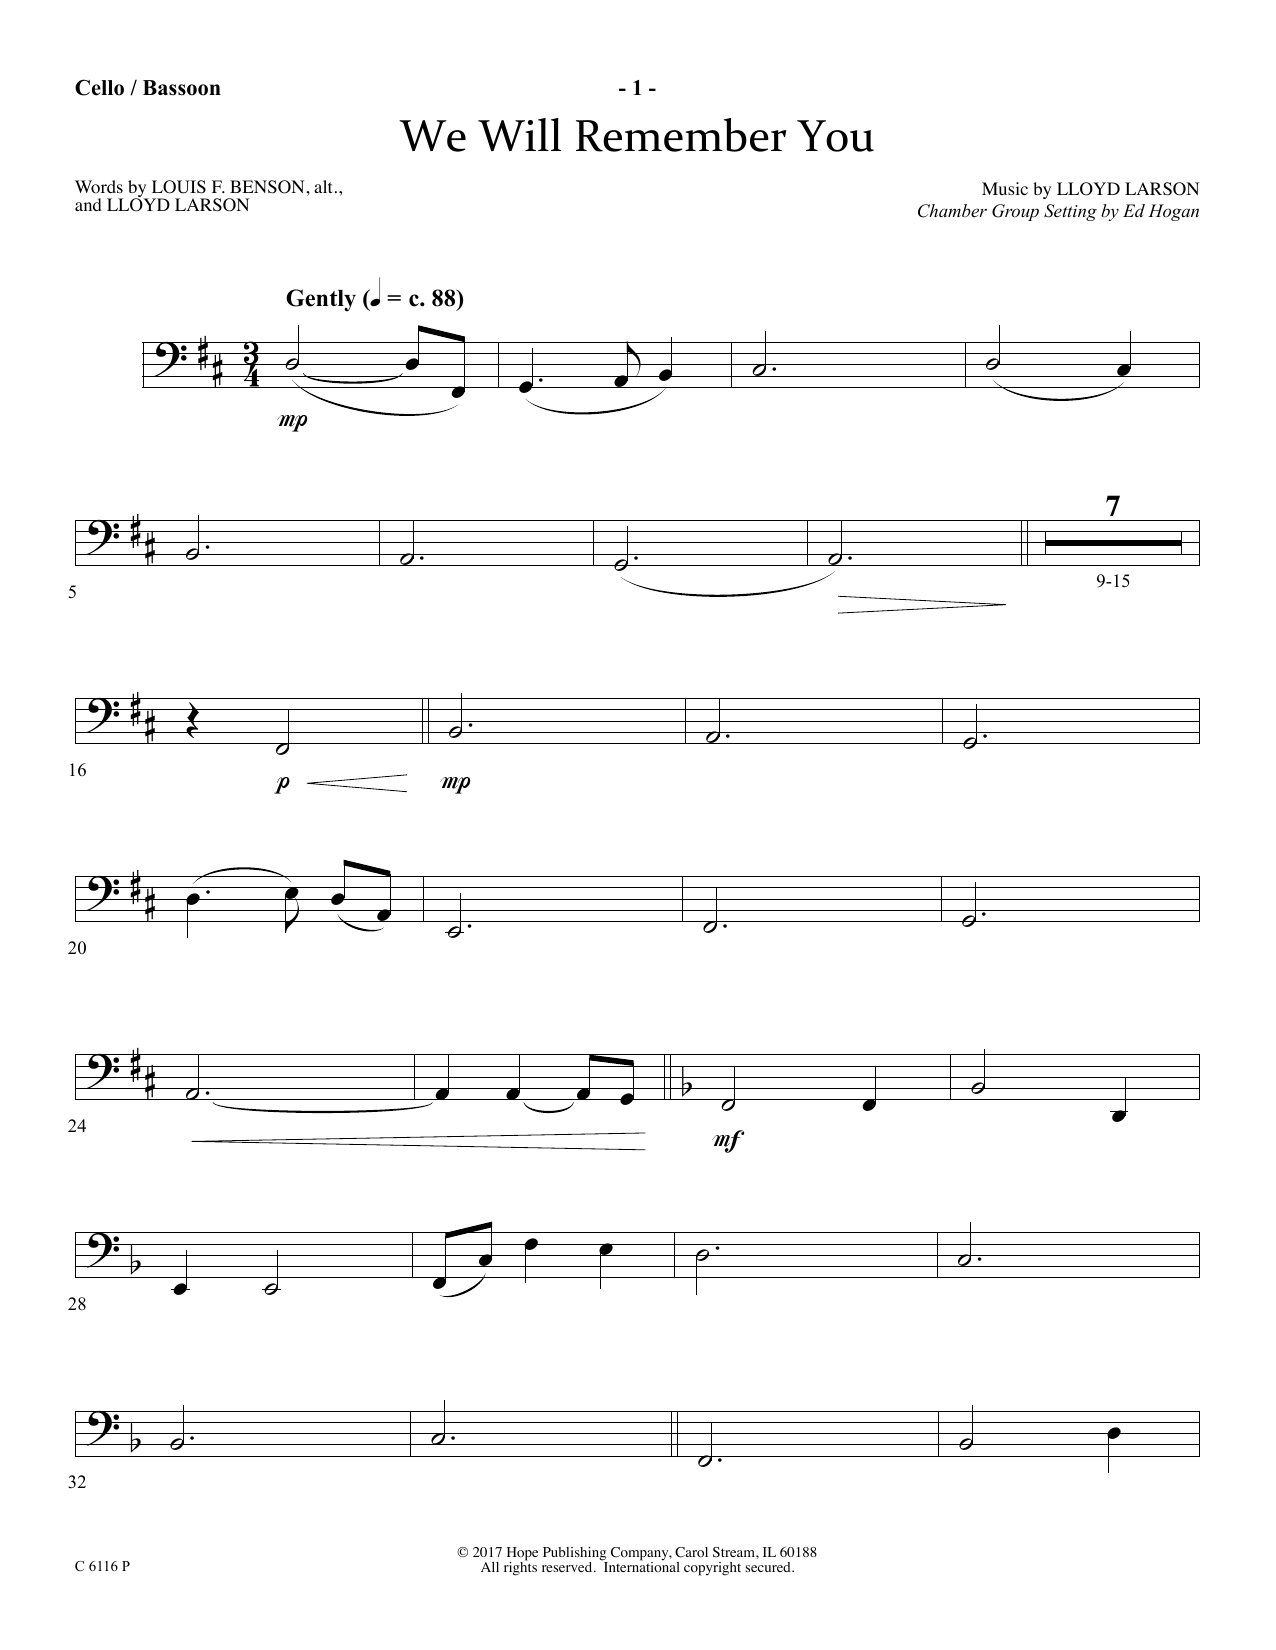 Download Ed Hogan We Will Remember You - Cello/Bassoon Sheet Music